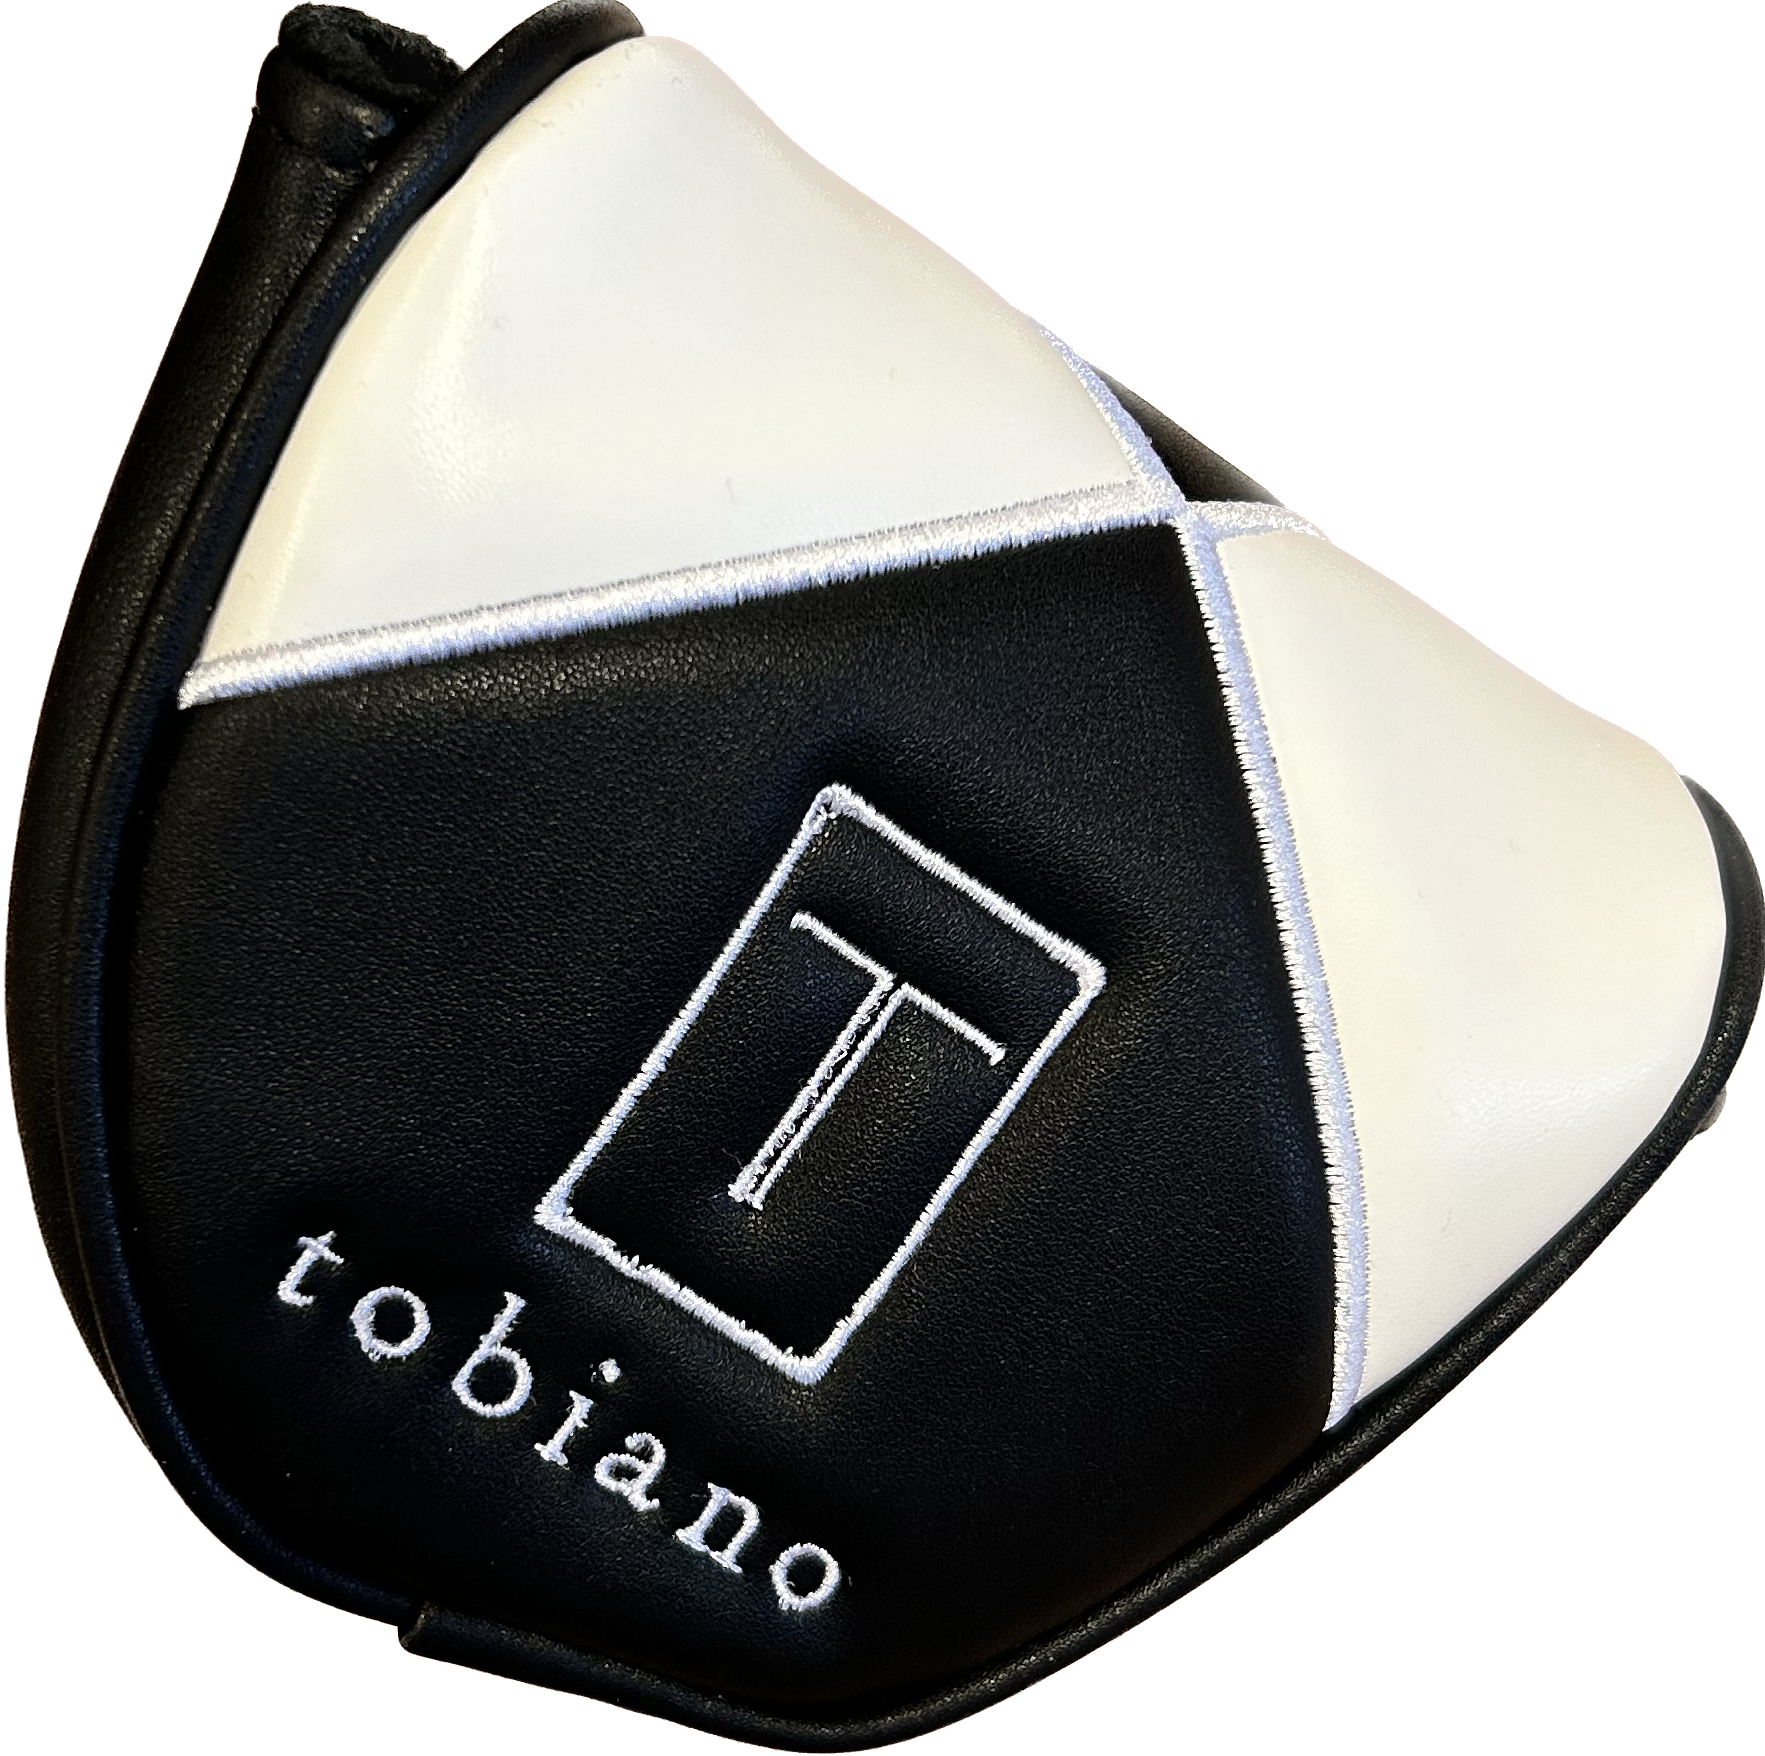 Tobiano Mallet Putter Headcover